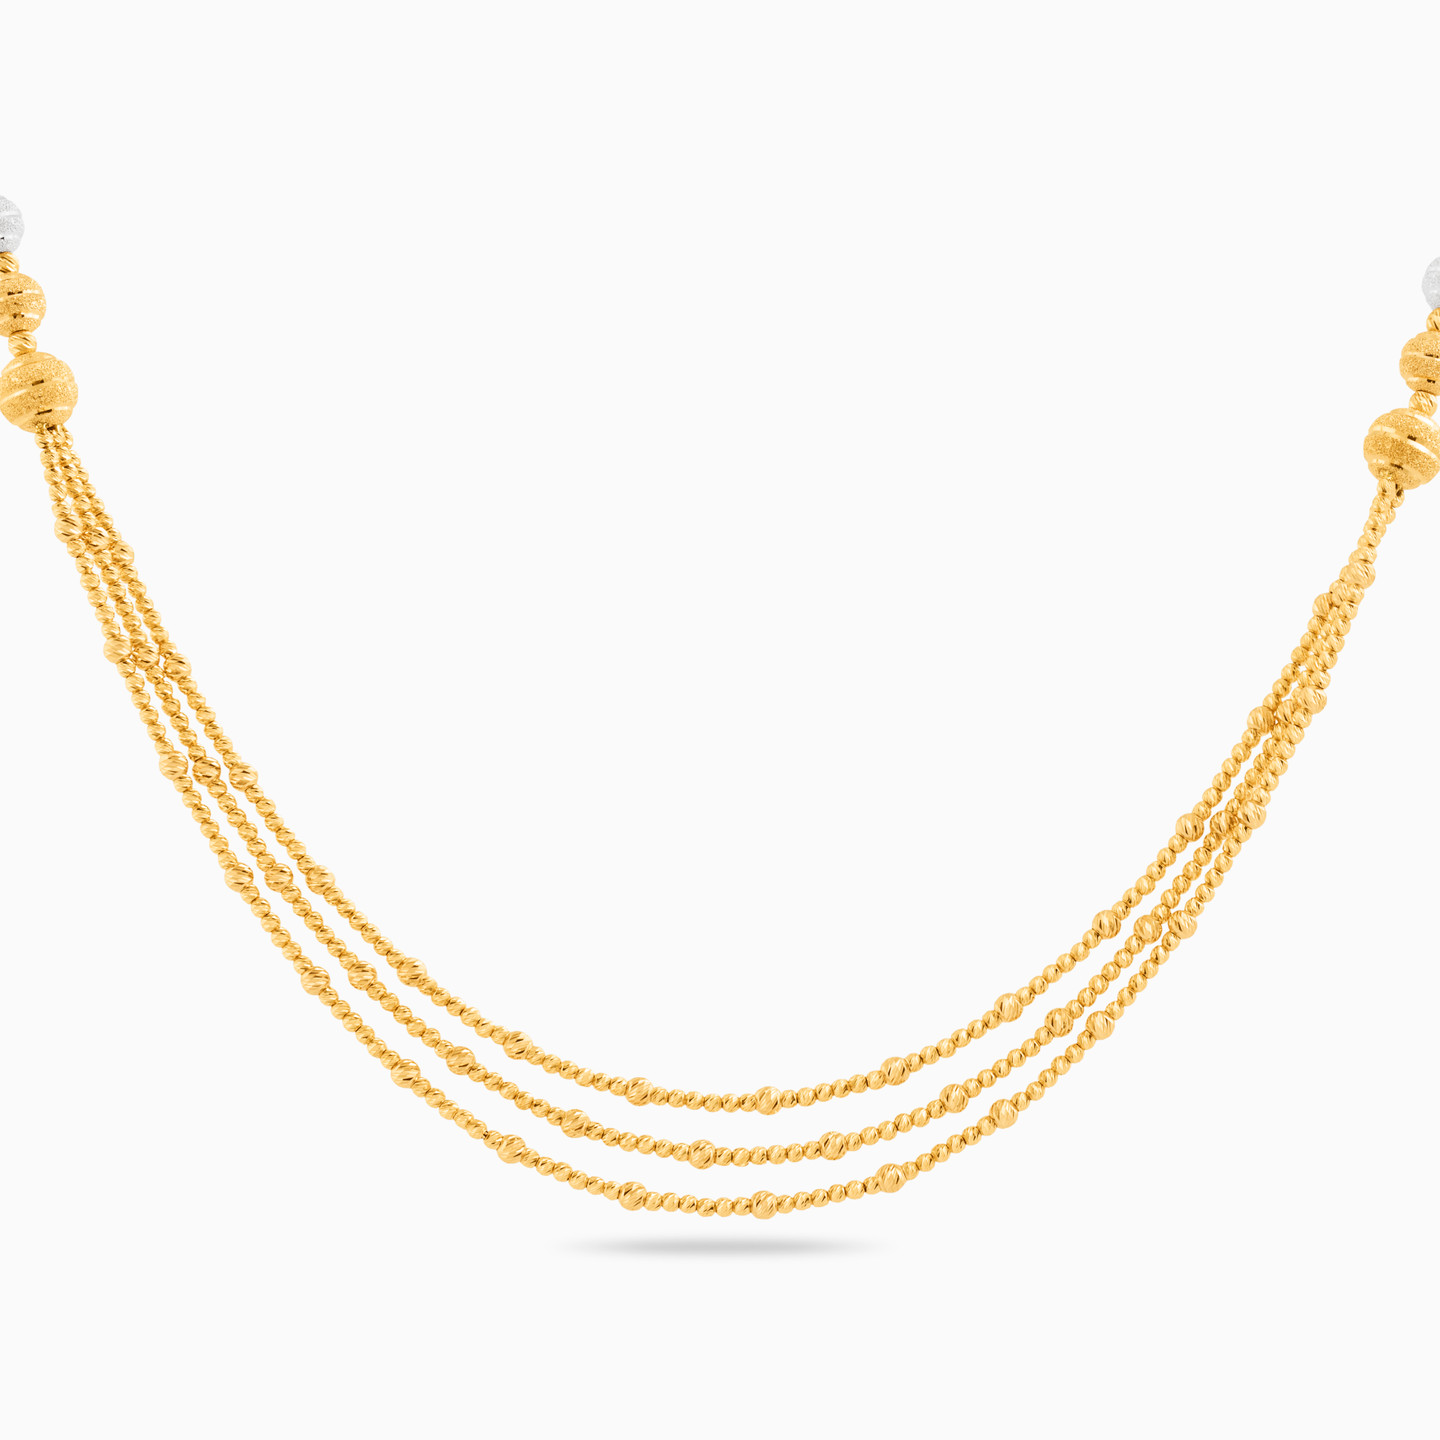 21K Gold Layered Necklace